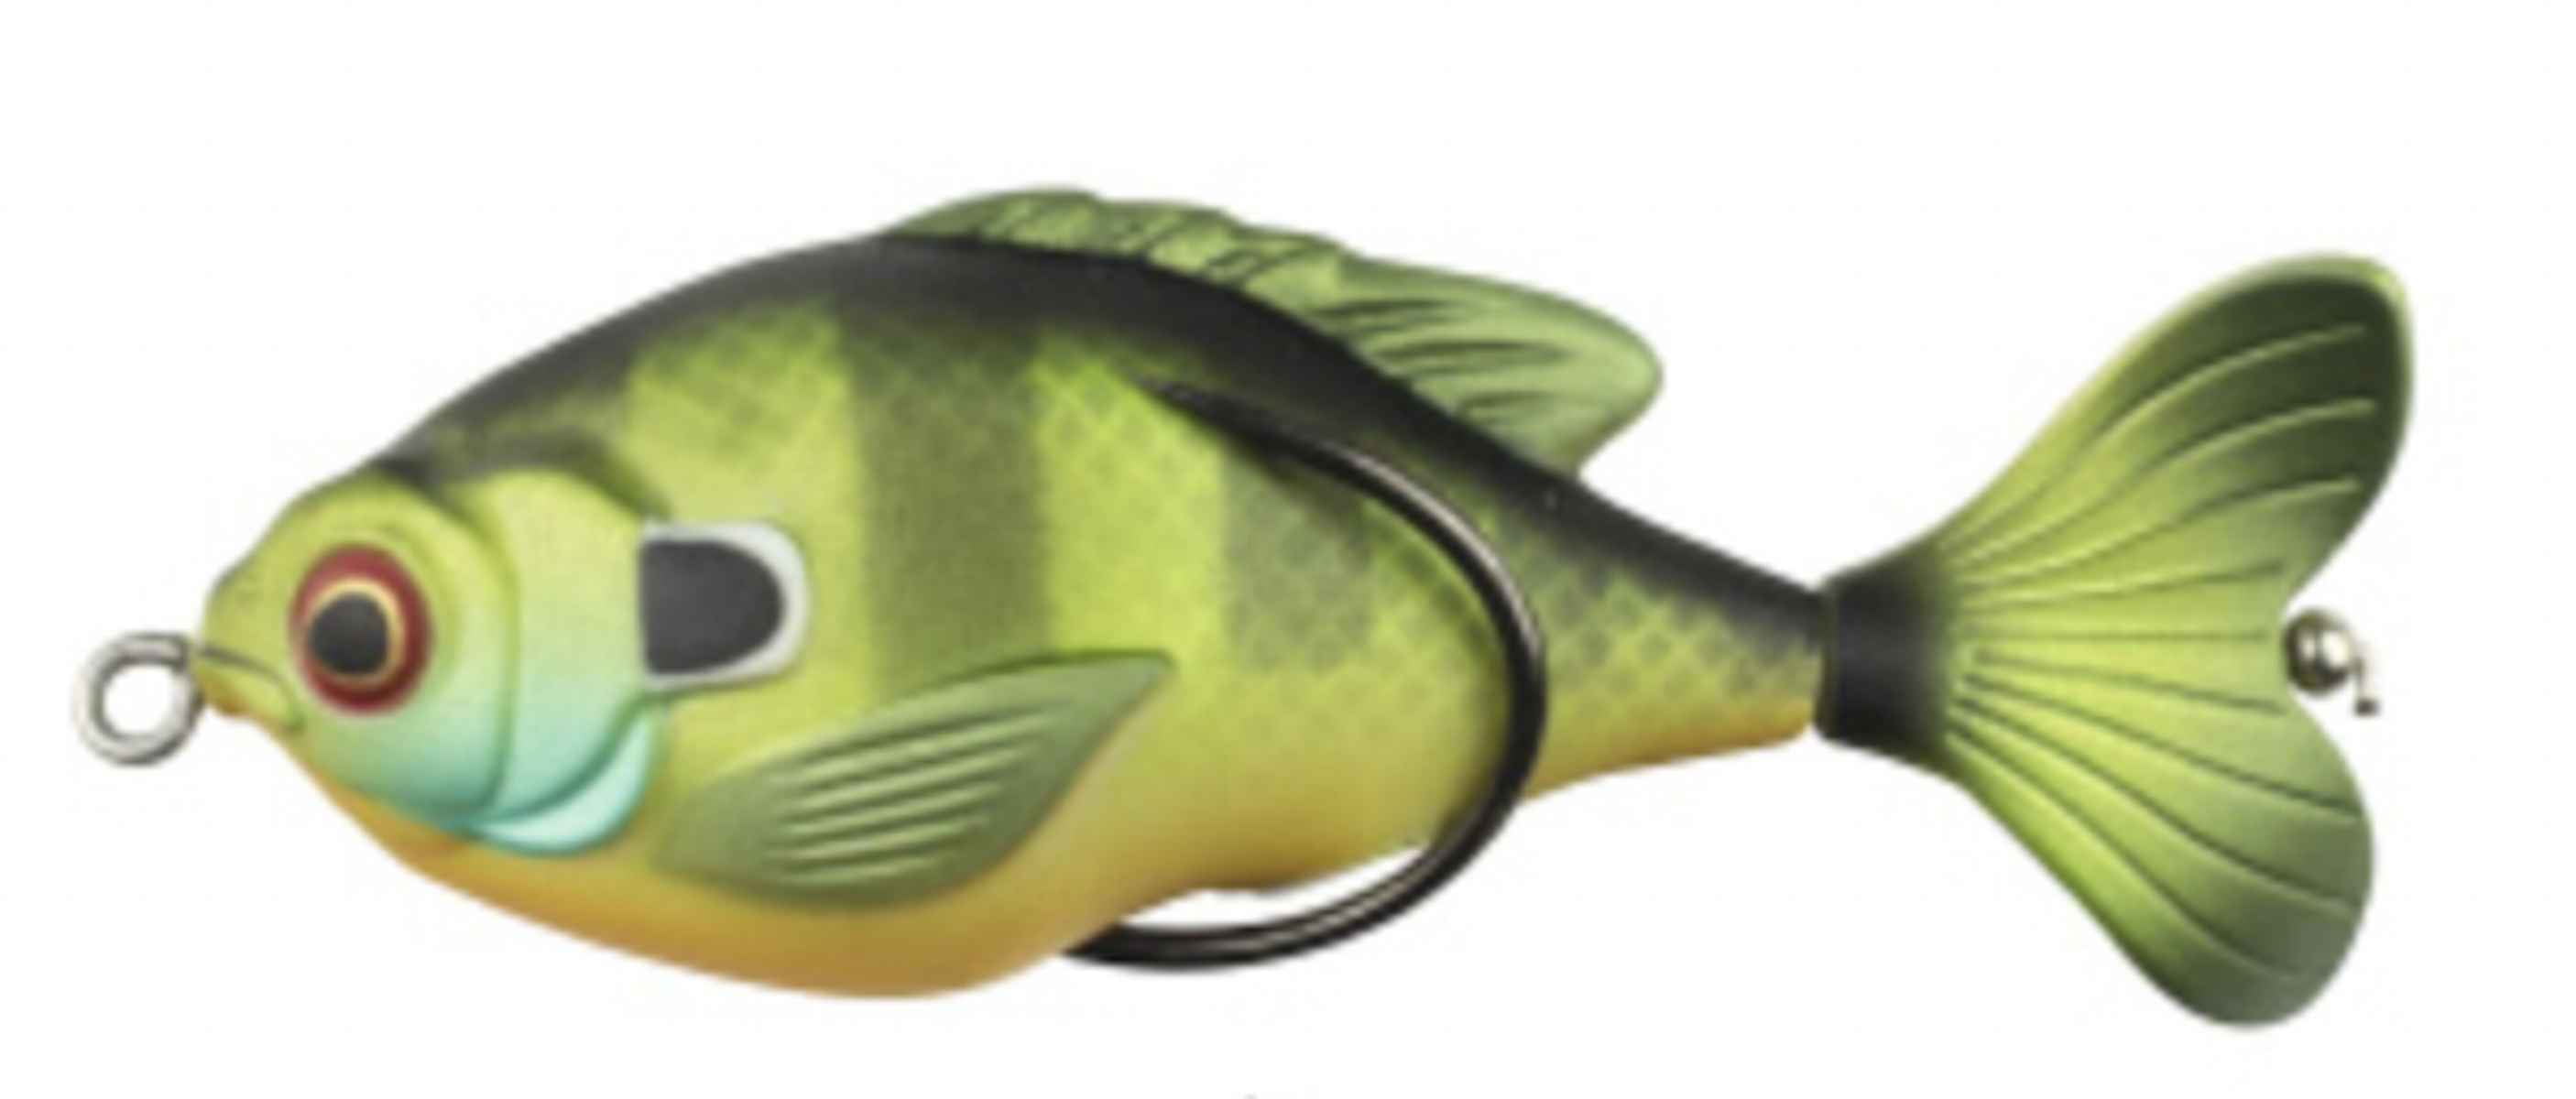 Lunkerhunt Prop Fish - Topwater Lure - Blue Gill,3.5in,1/2oz,Soft  Baits,Fishing Lures 